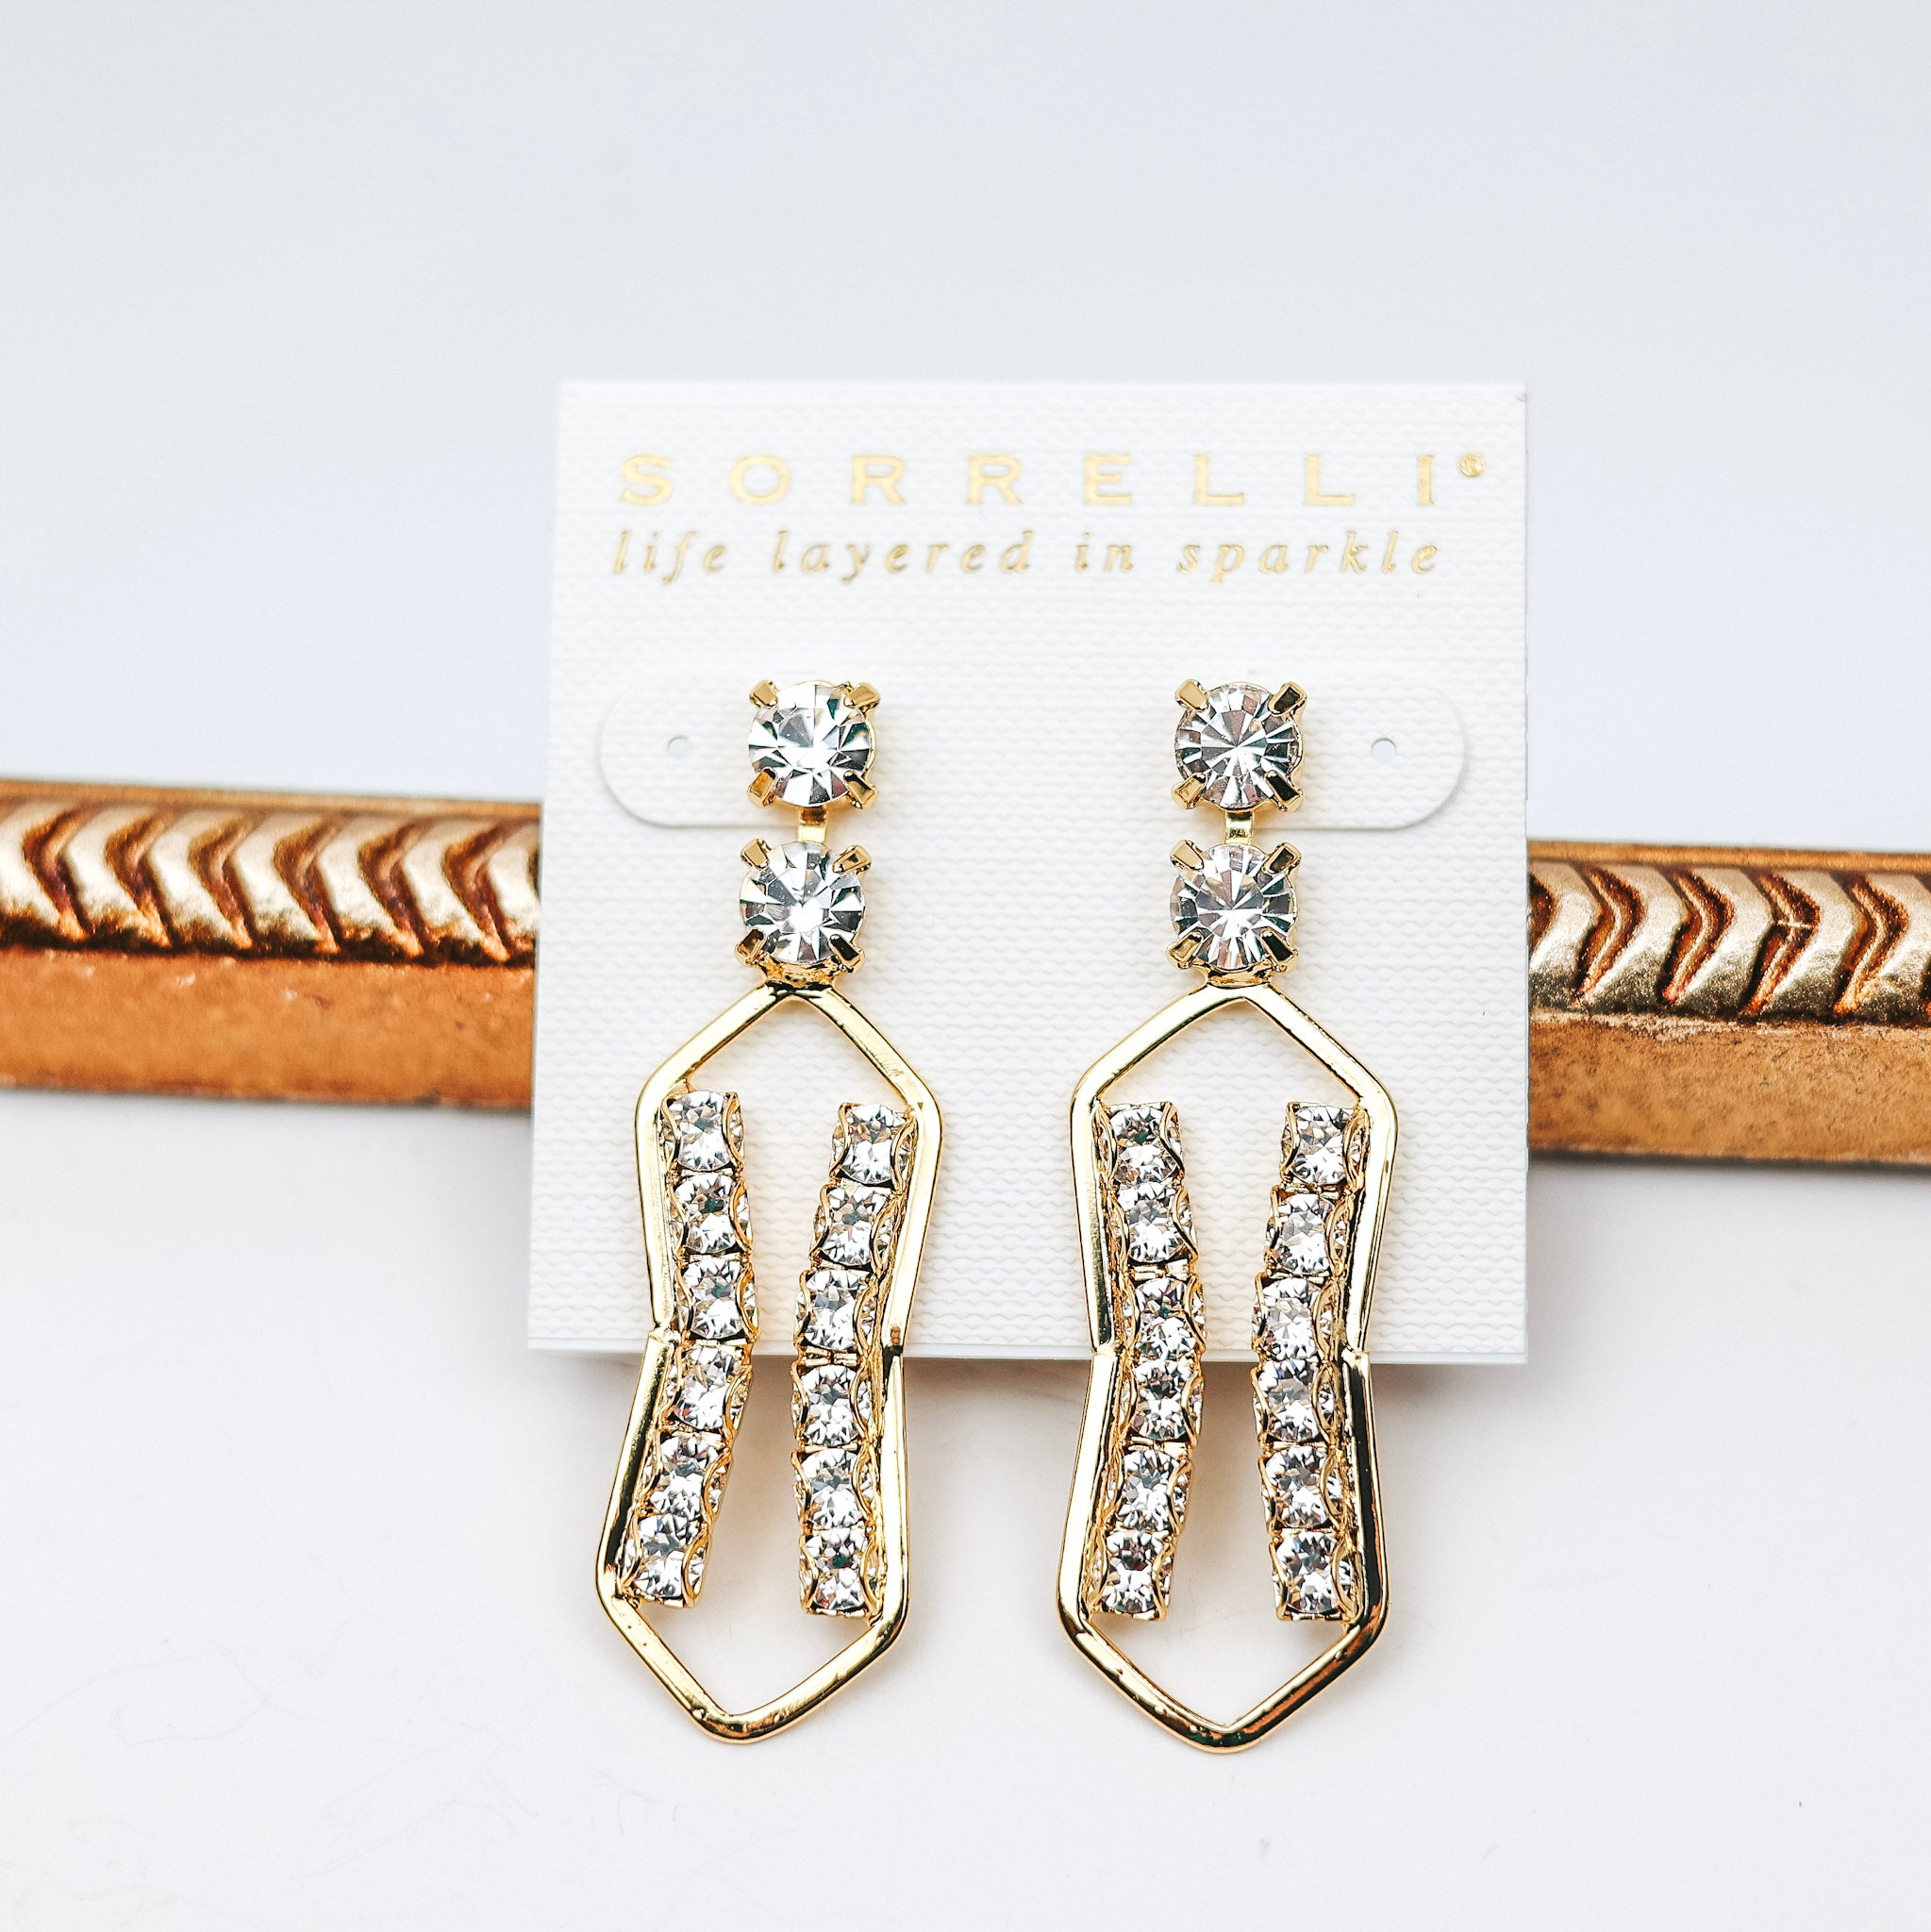 A pair of gold dangle earrings with clear crystals all over. These earrings are pictured on a white background.